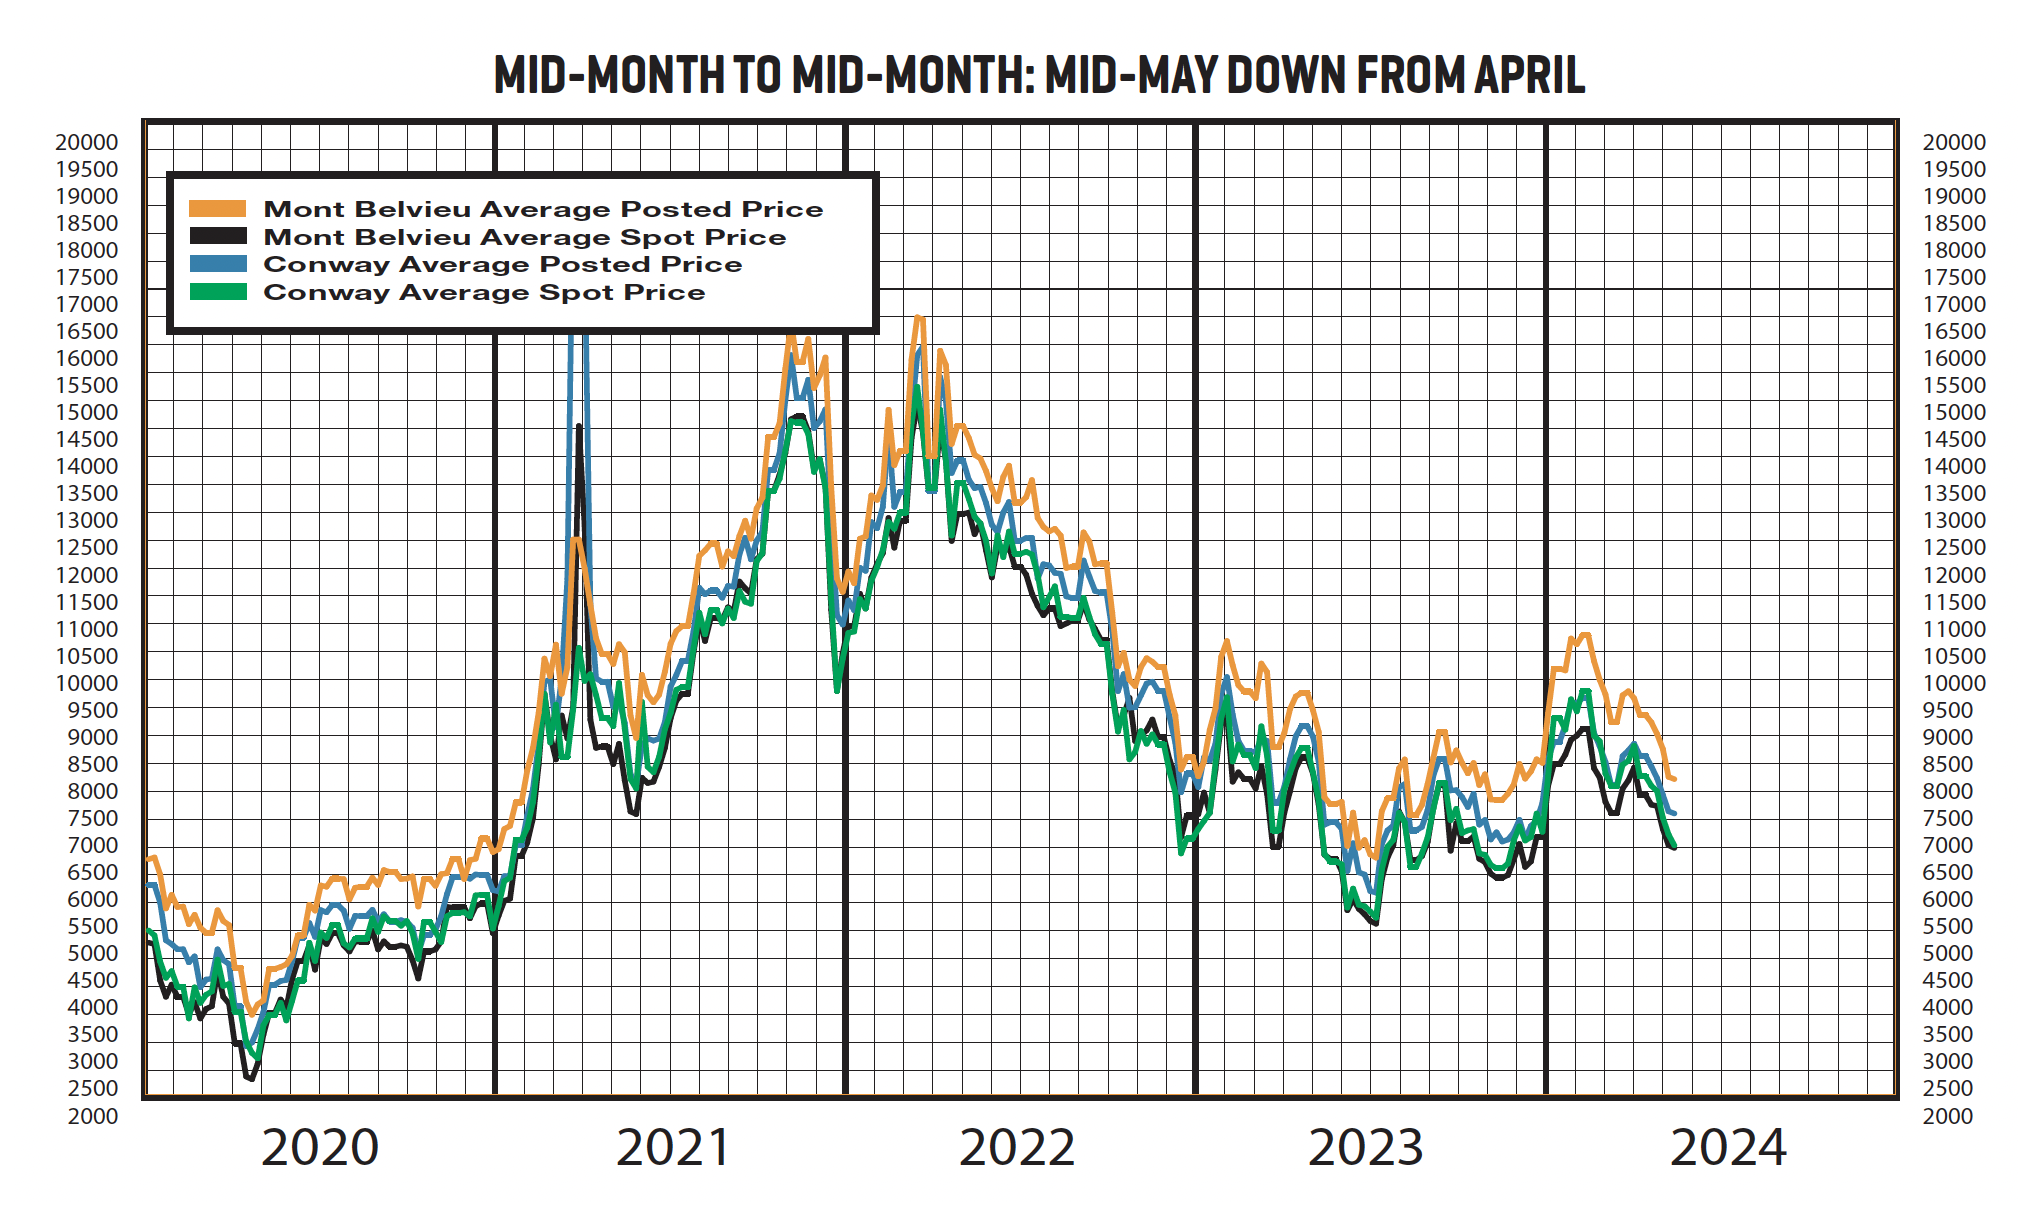 A graph of historical data for mid-month posting and spot prices from 2020 to 2024, ending with the May mid-month data.